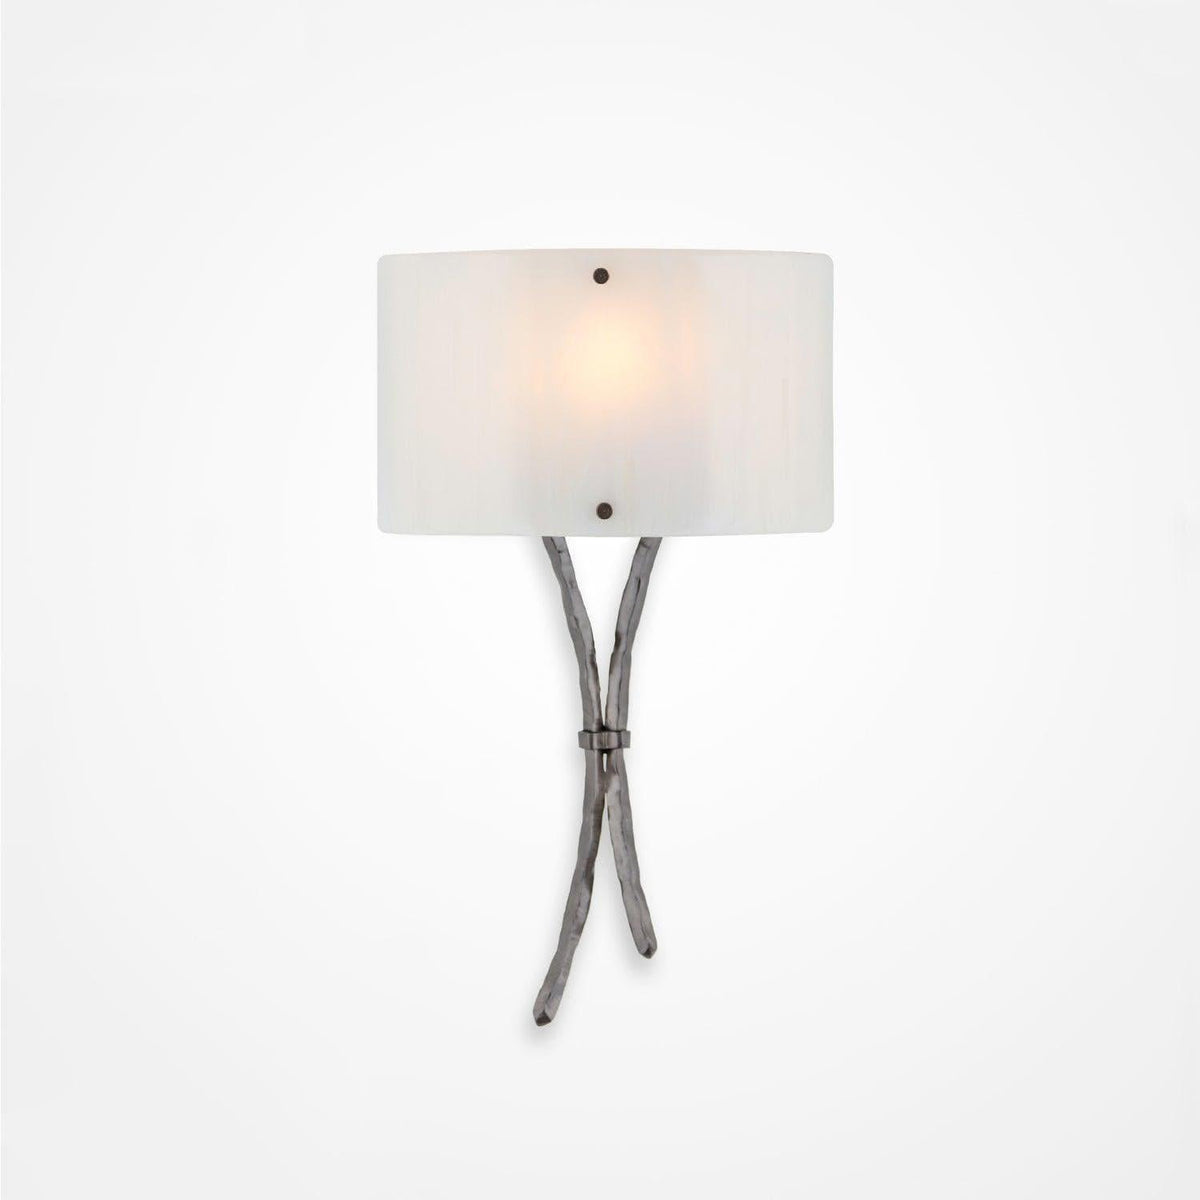 Hammerton Studio - Ironwood Sprout Cover Sconce - CSB0032-0B-SN-IW-E2 | Montreal Lighting & Hardware